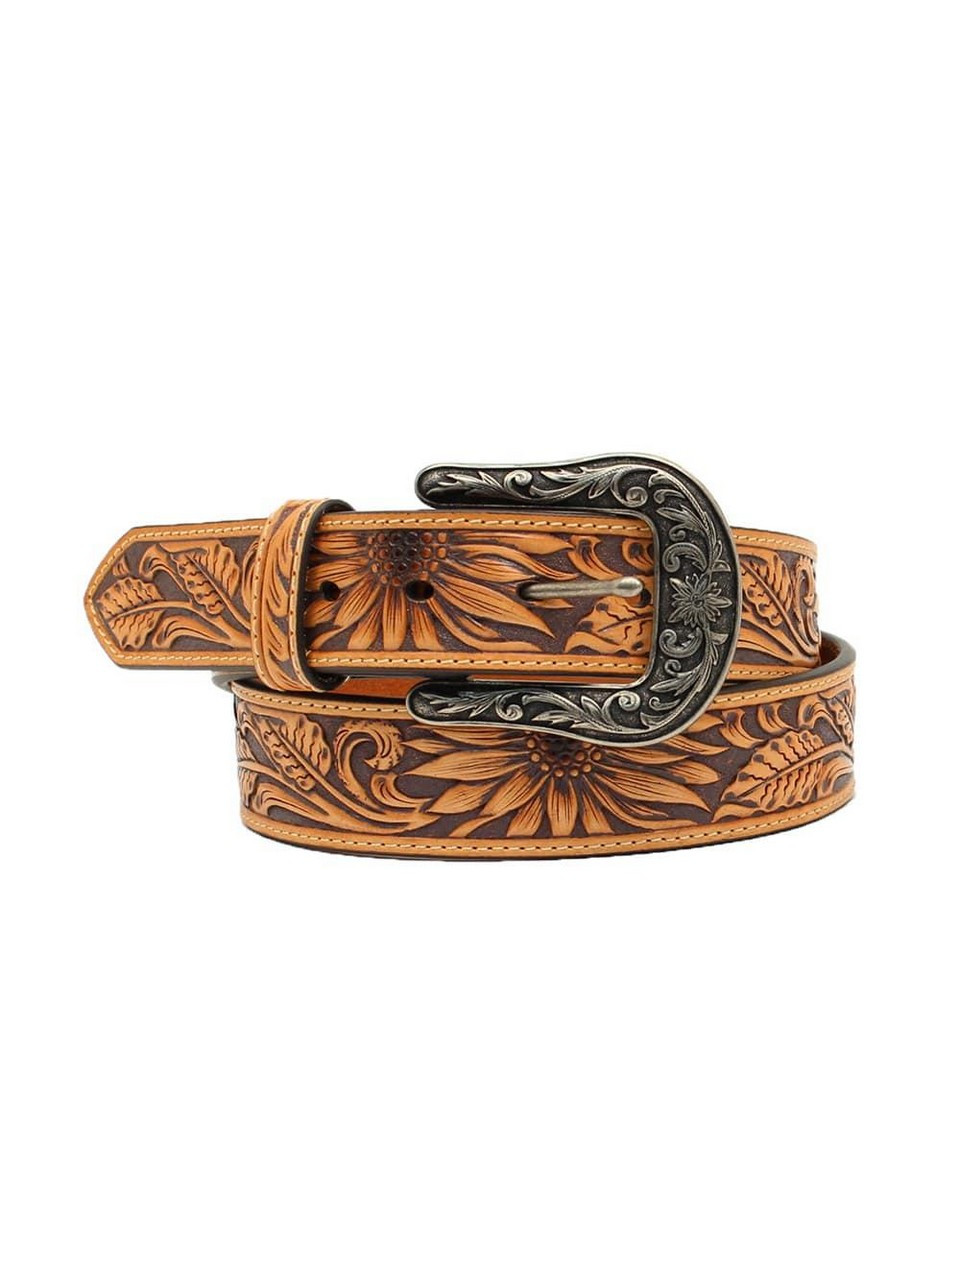 Nocona Women's Floral Tooled Overlay Leather Belt - N3412308